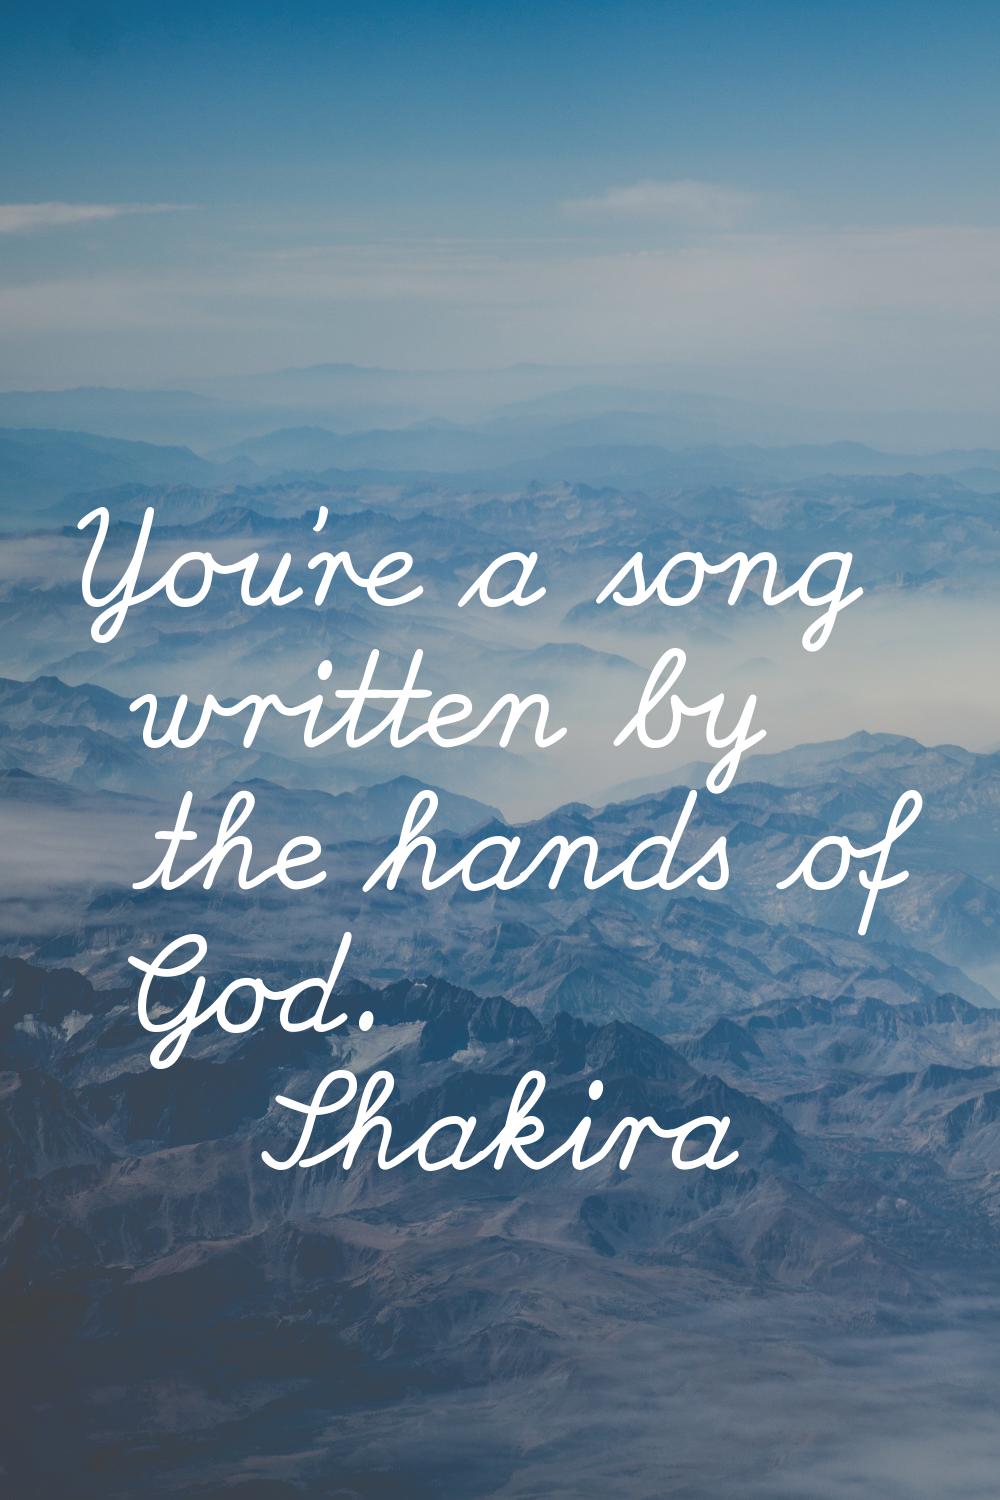 You're a song written by the hands of God.